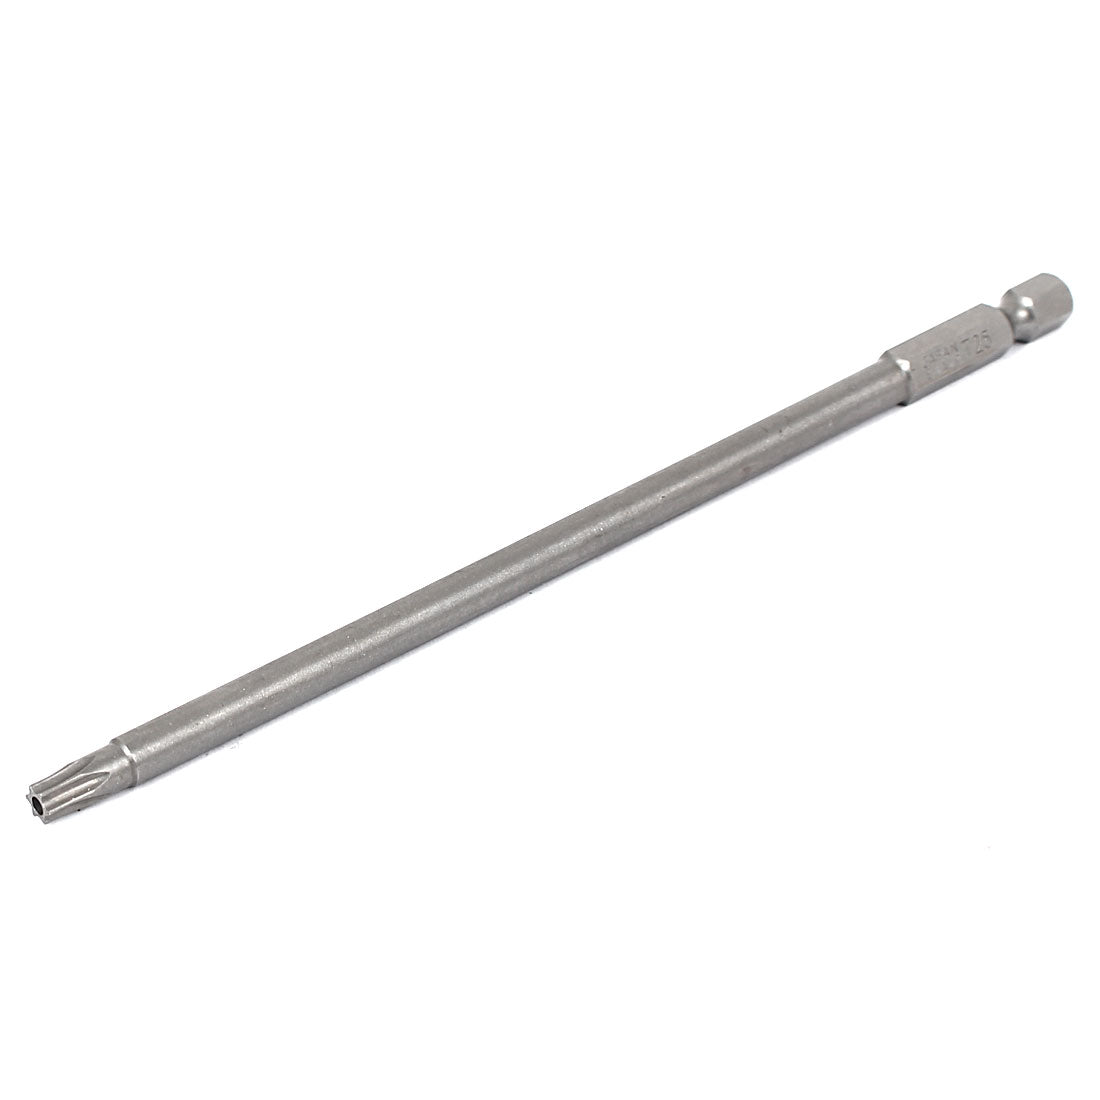 Uxcell Uxcell 150mm Length 1/4" Hex Shank T10 Magnetic Torx Security Screwdriver Bits